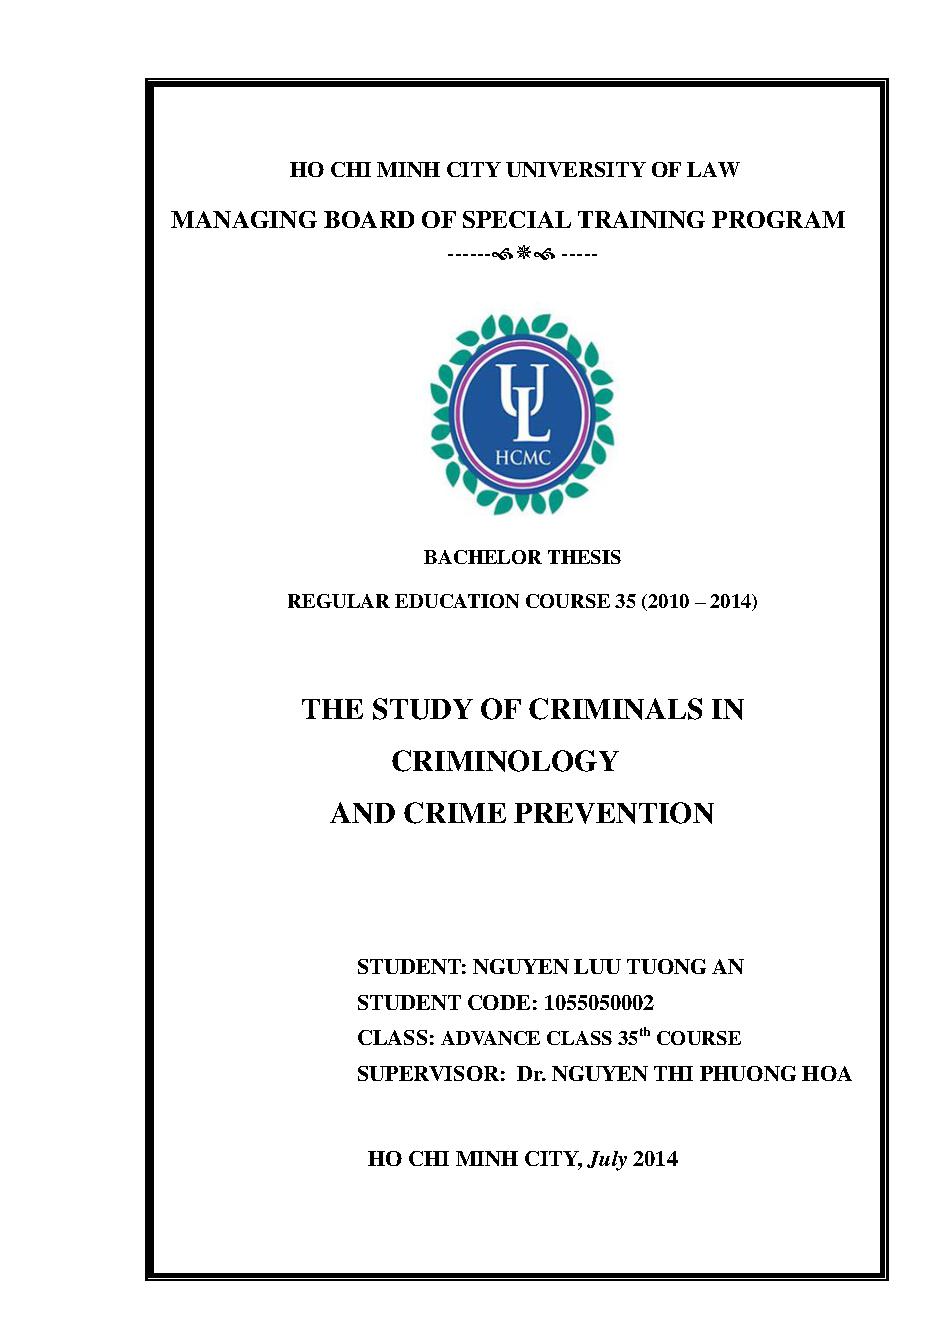 The study of criminals in criminology and crime prevention